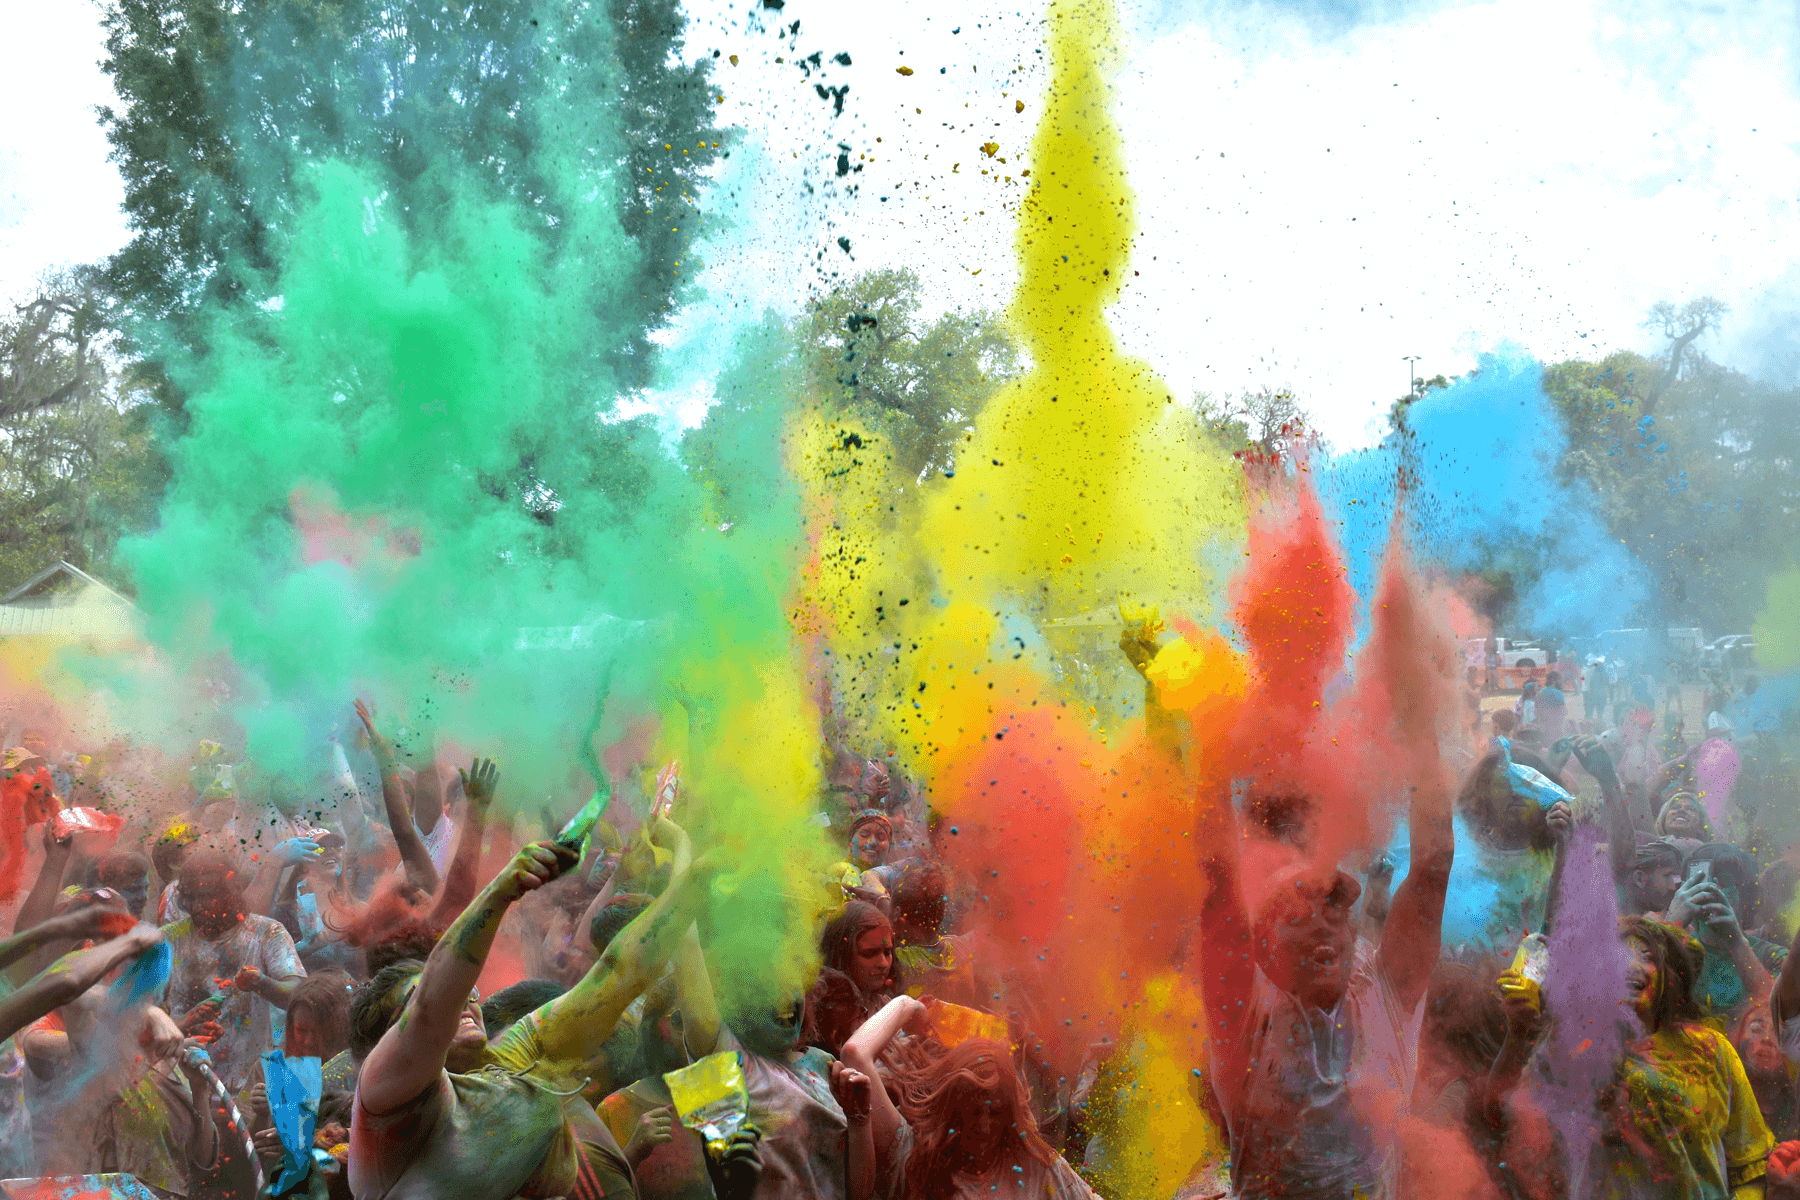 Close up photo of a group of revelers throw colors in the air at a Holi celebration.